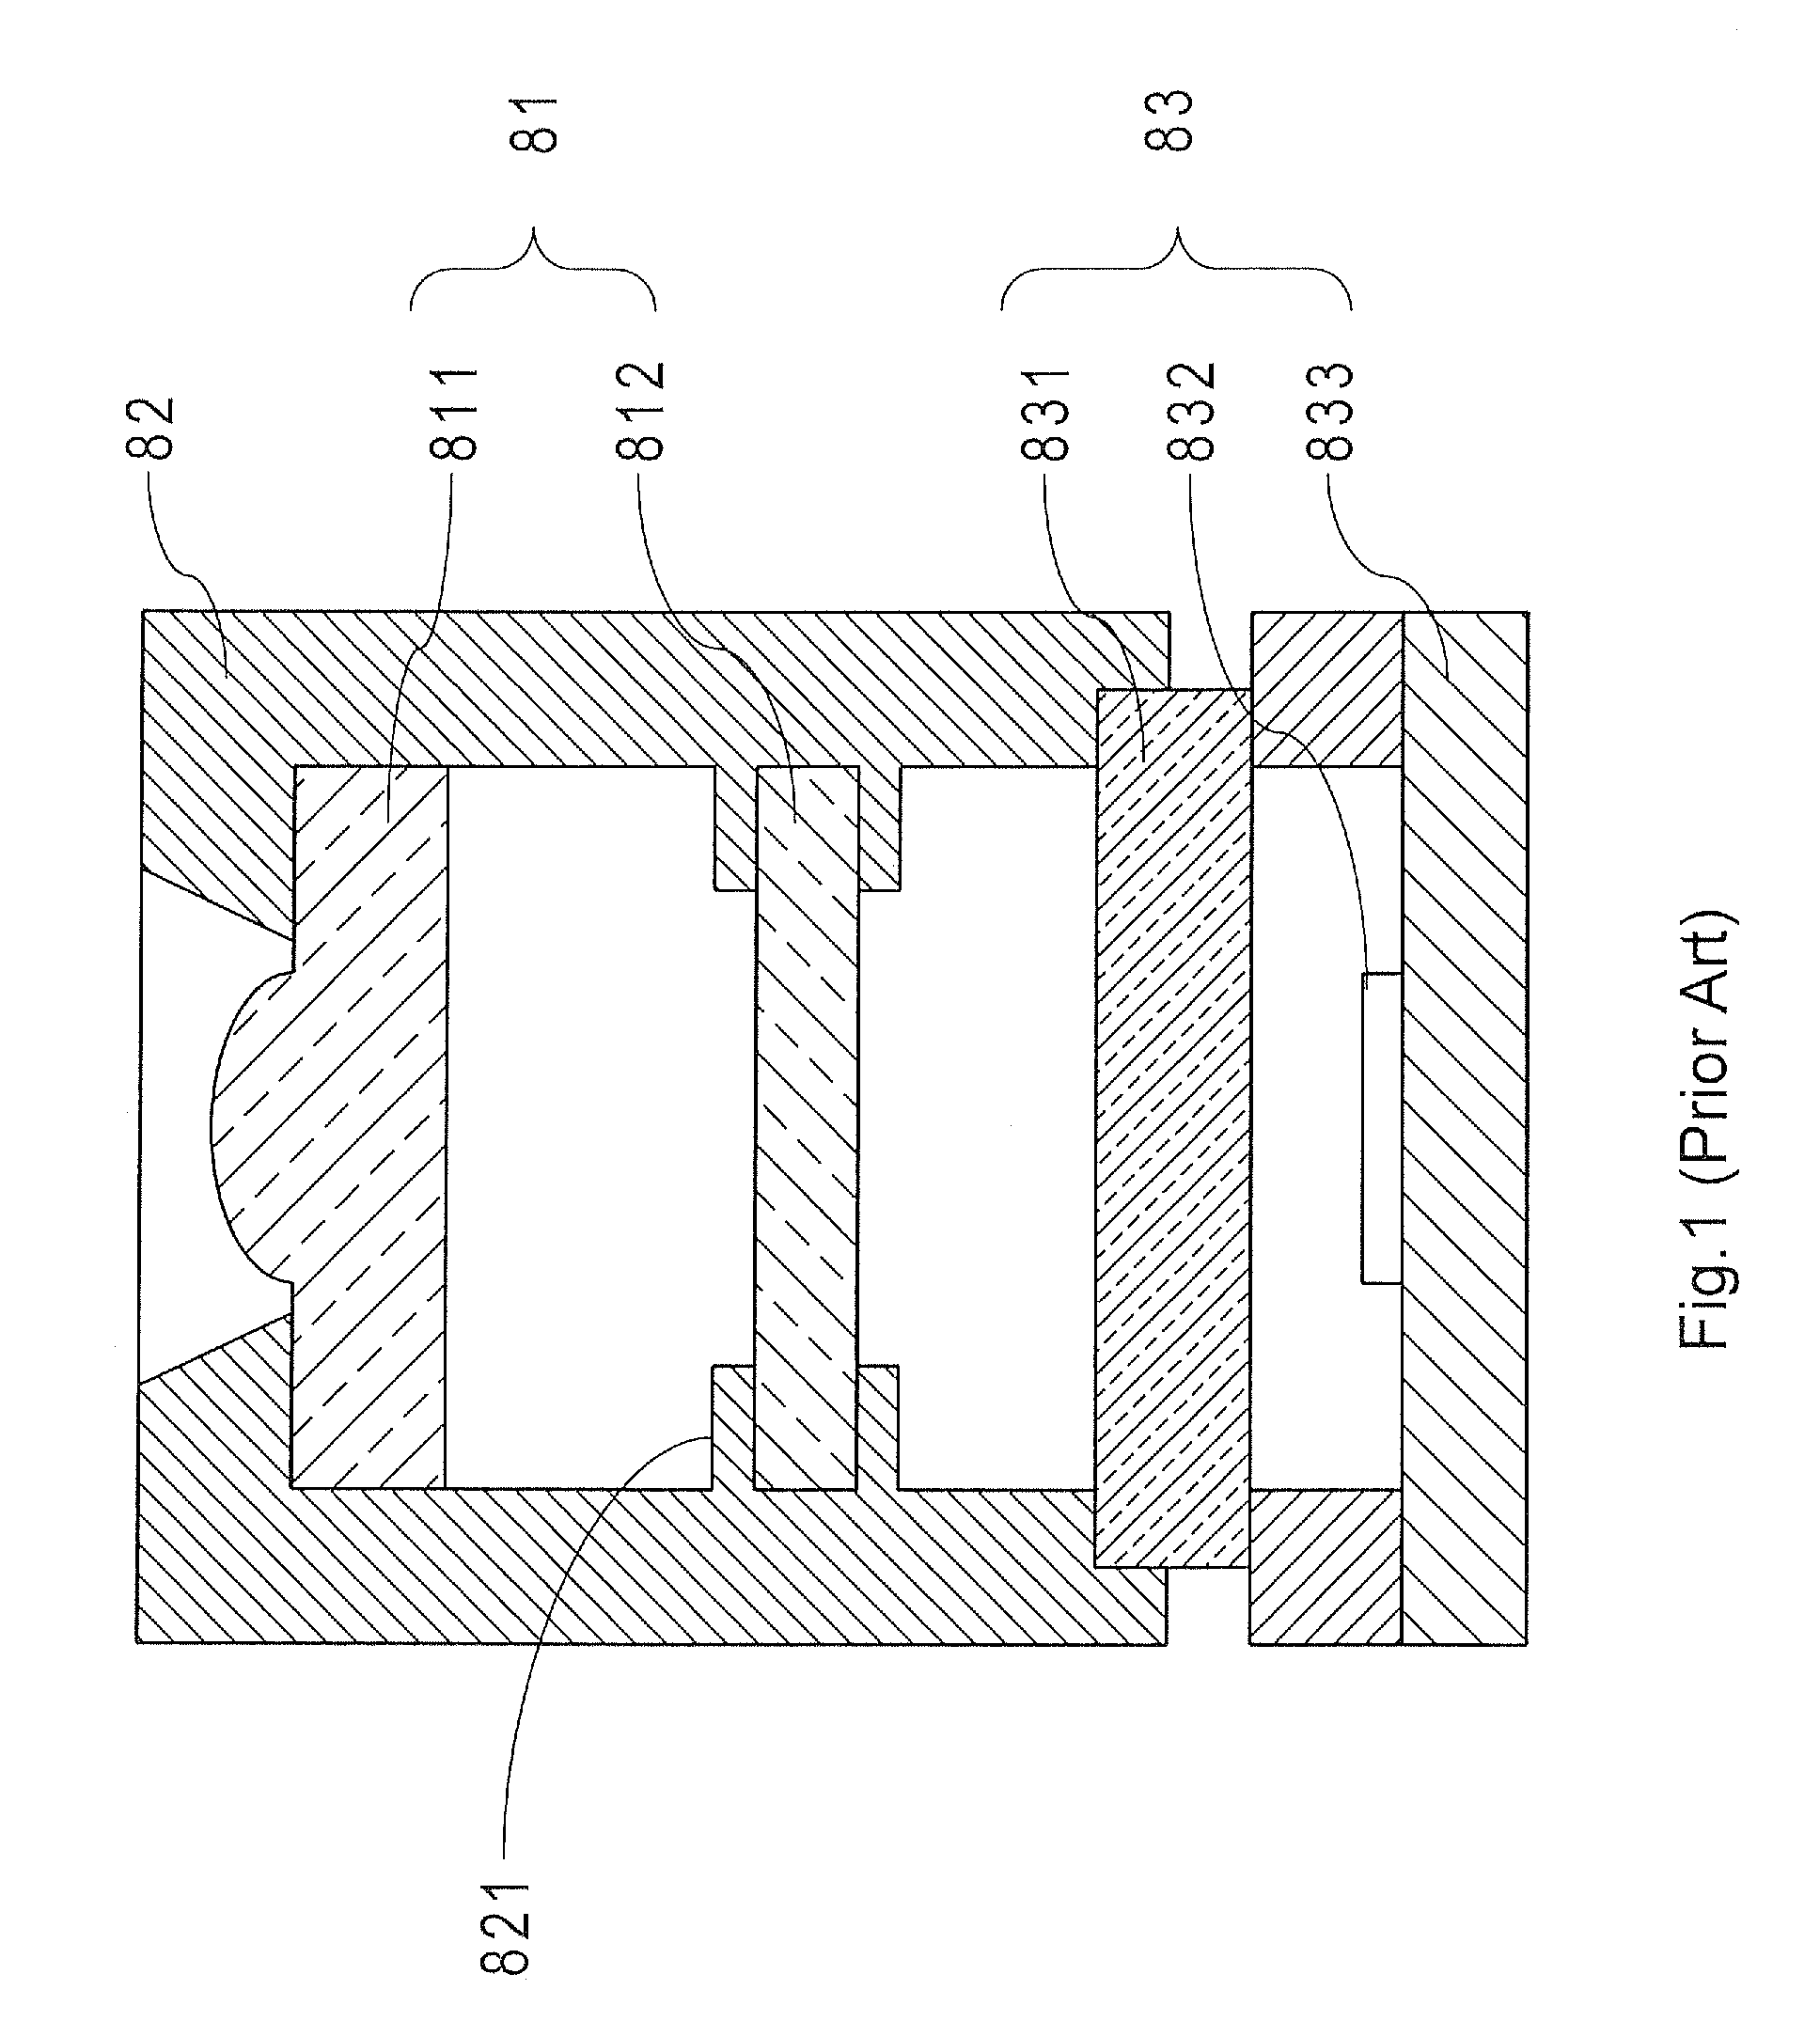 Image Detecting Module and Lens Module